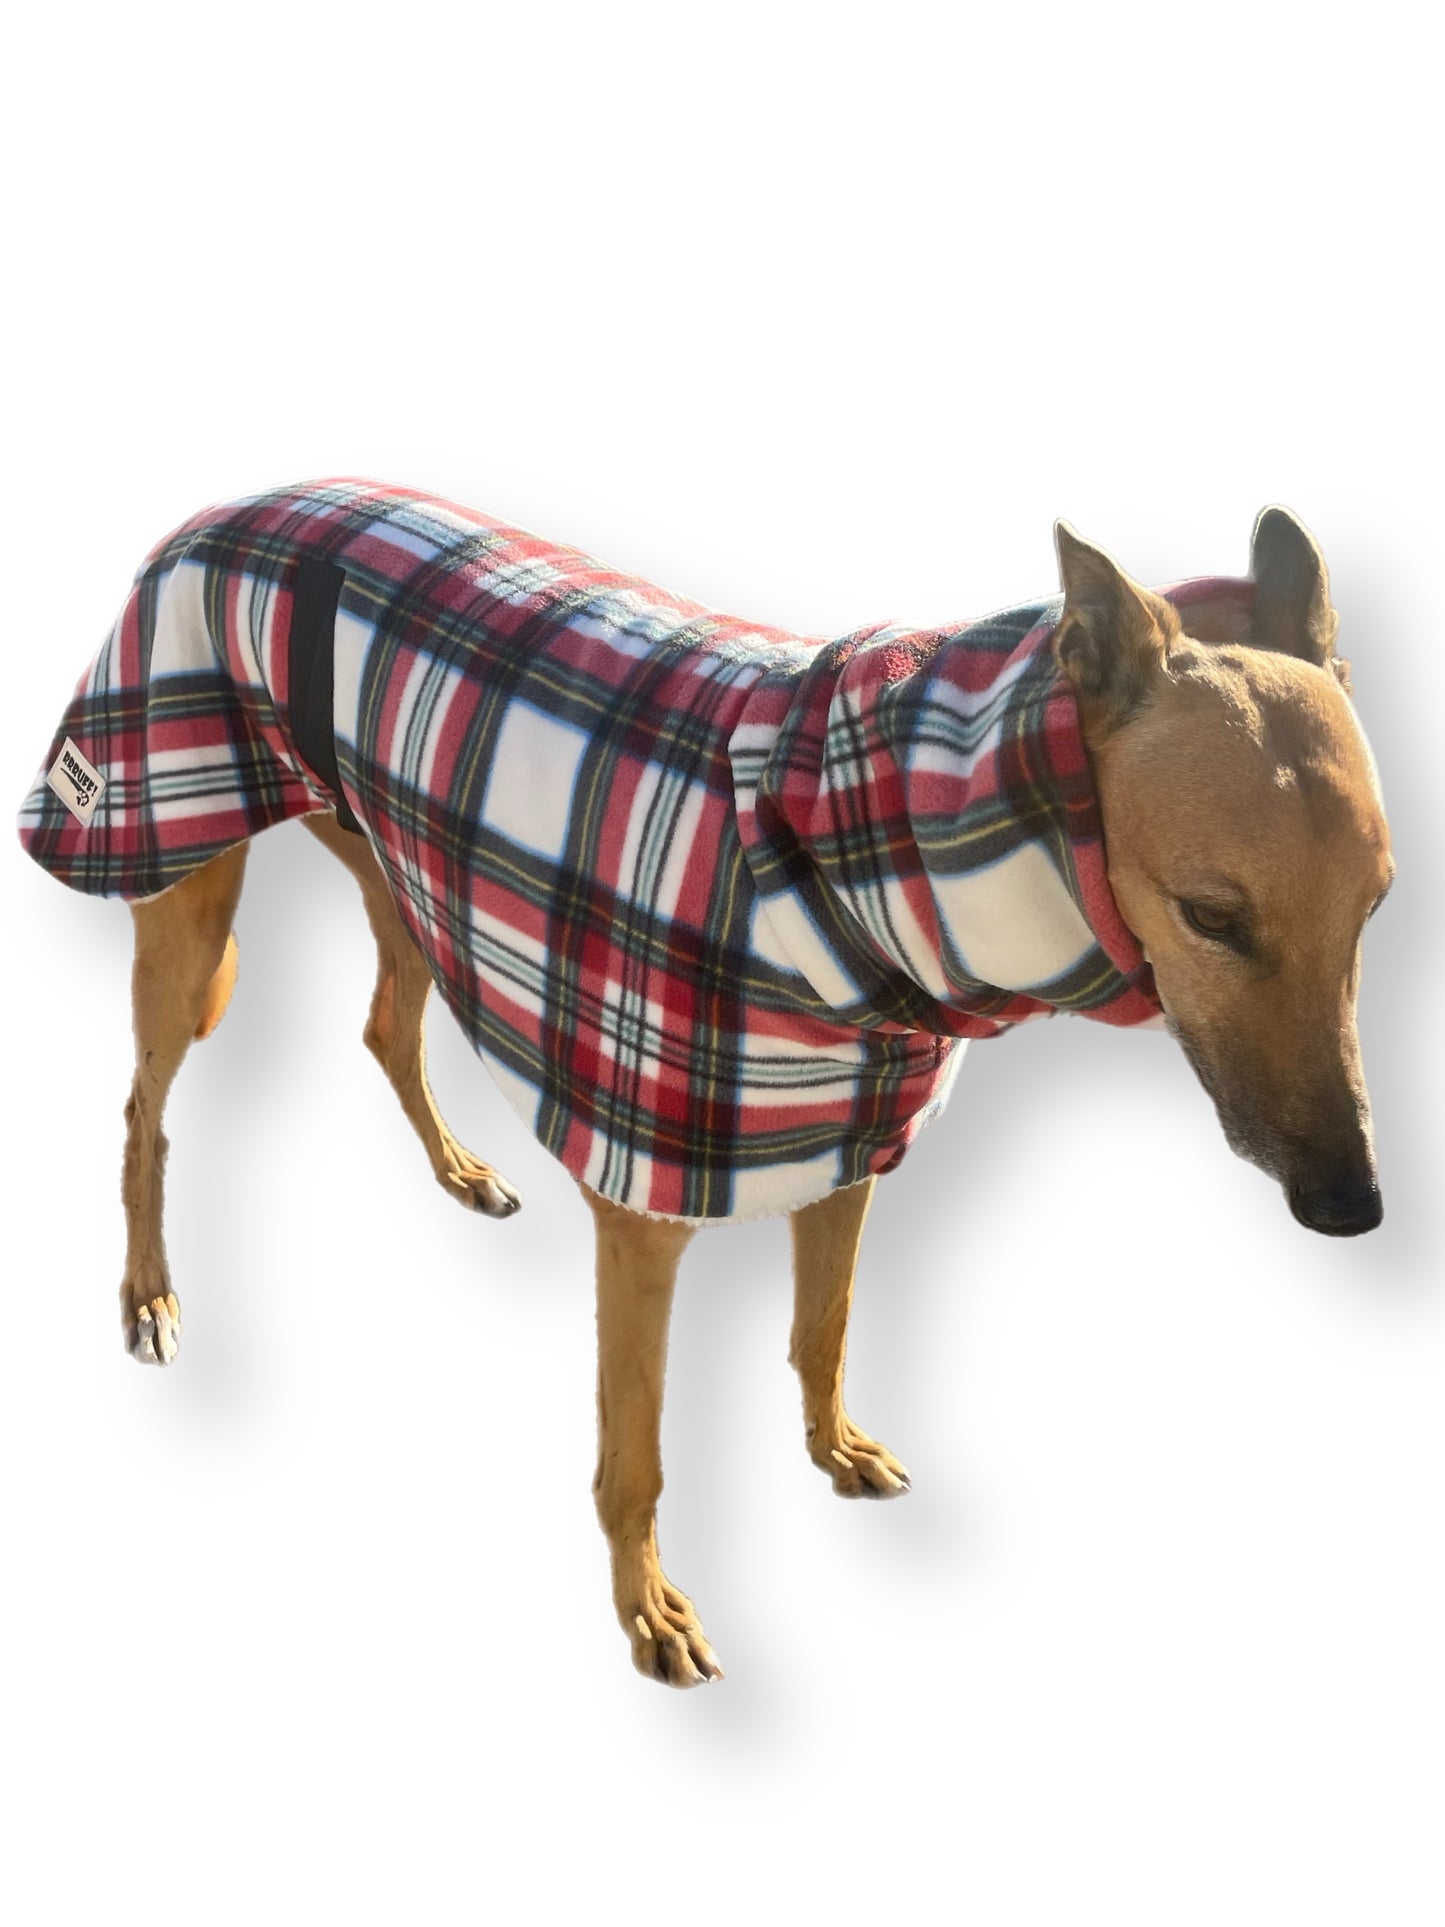 Trendsetter Lumberjack Greyhound coat in deluxe style rug flanno check polar fleece washable extra wide neck